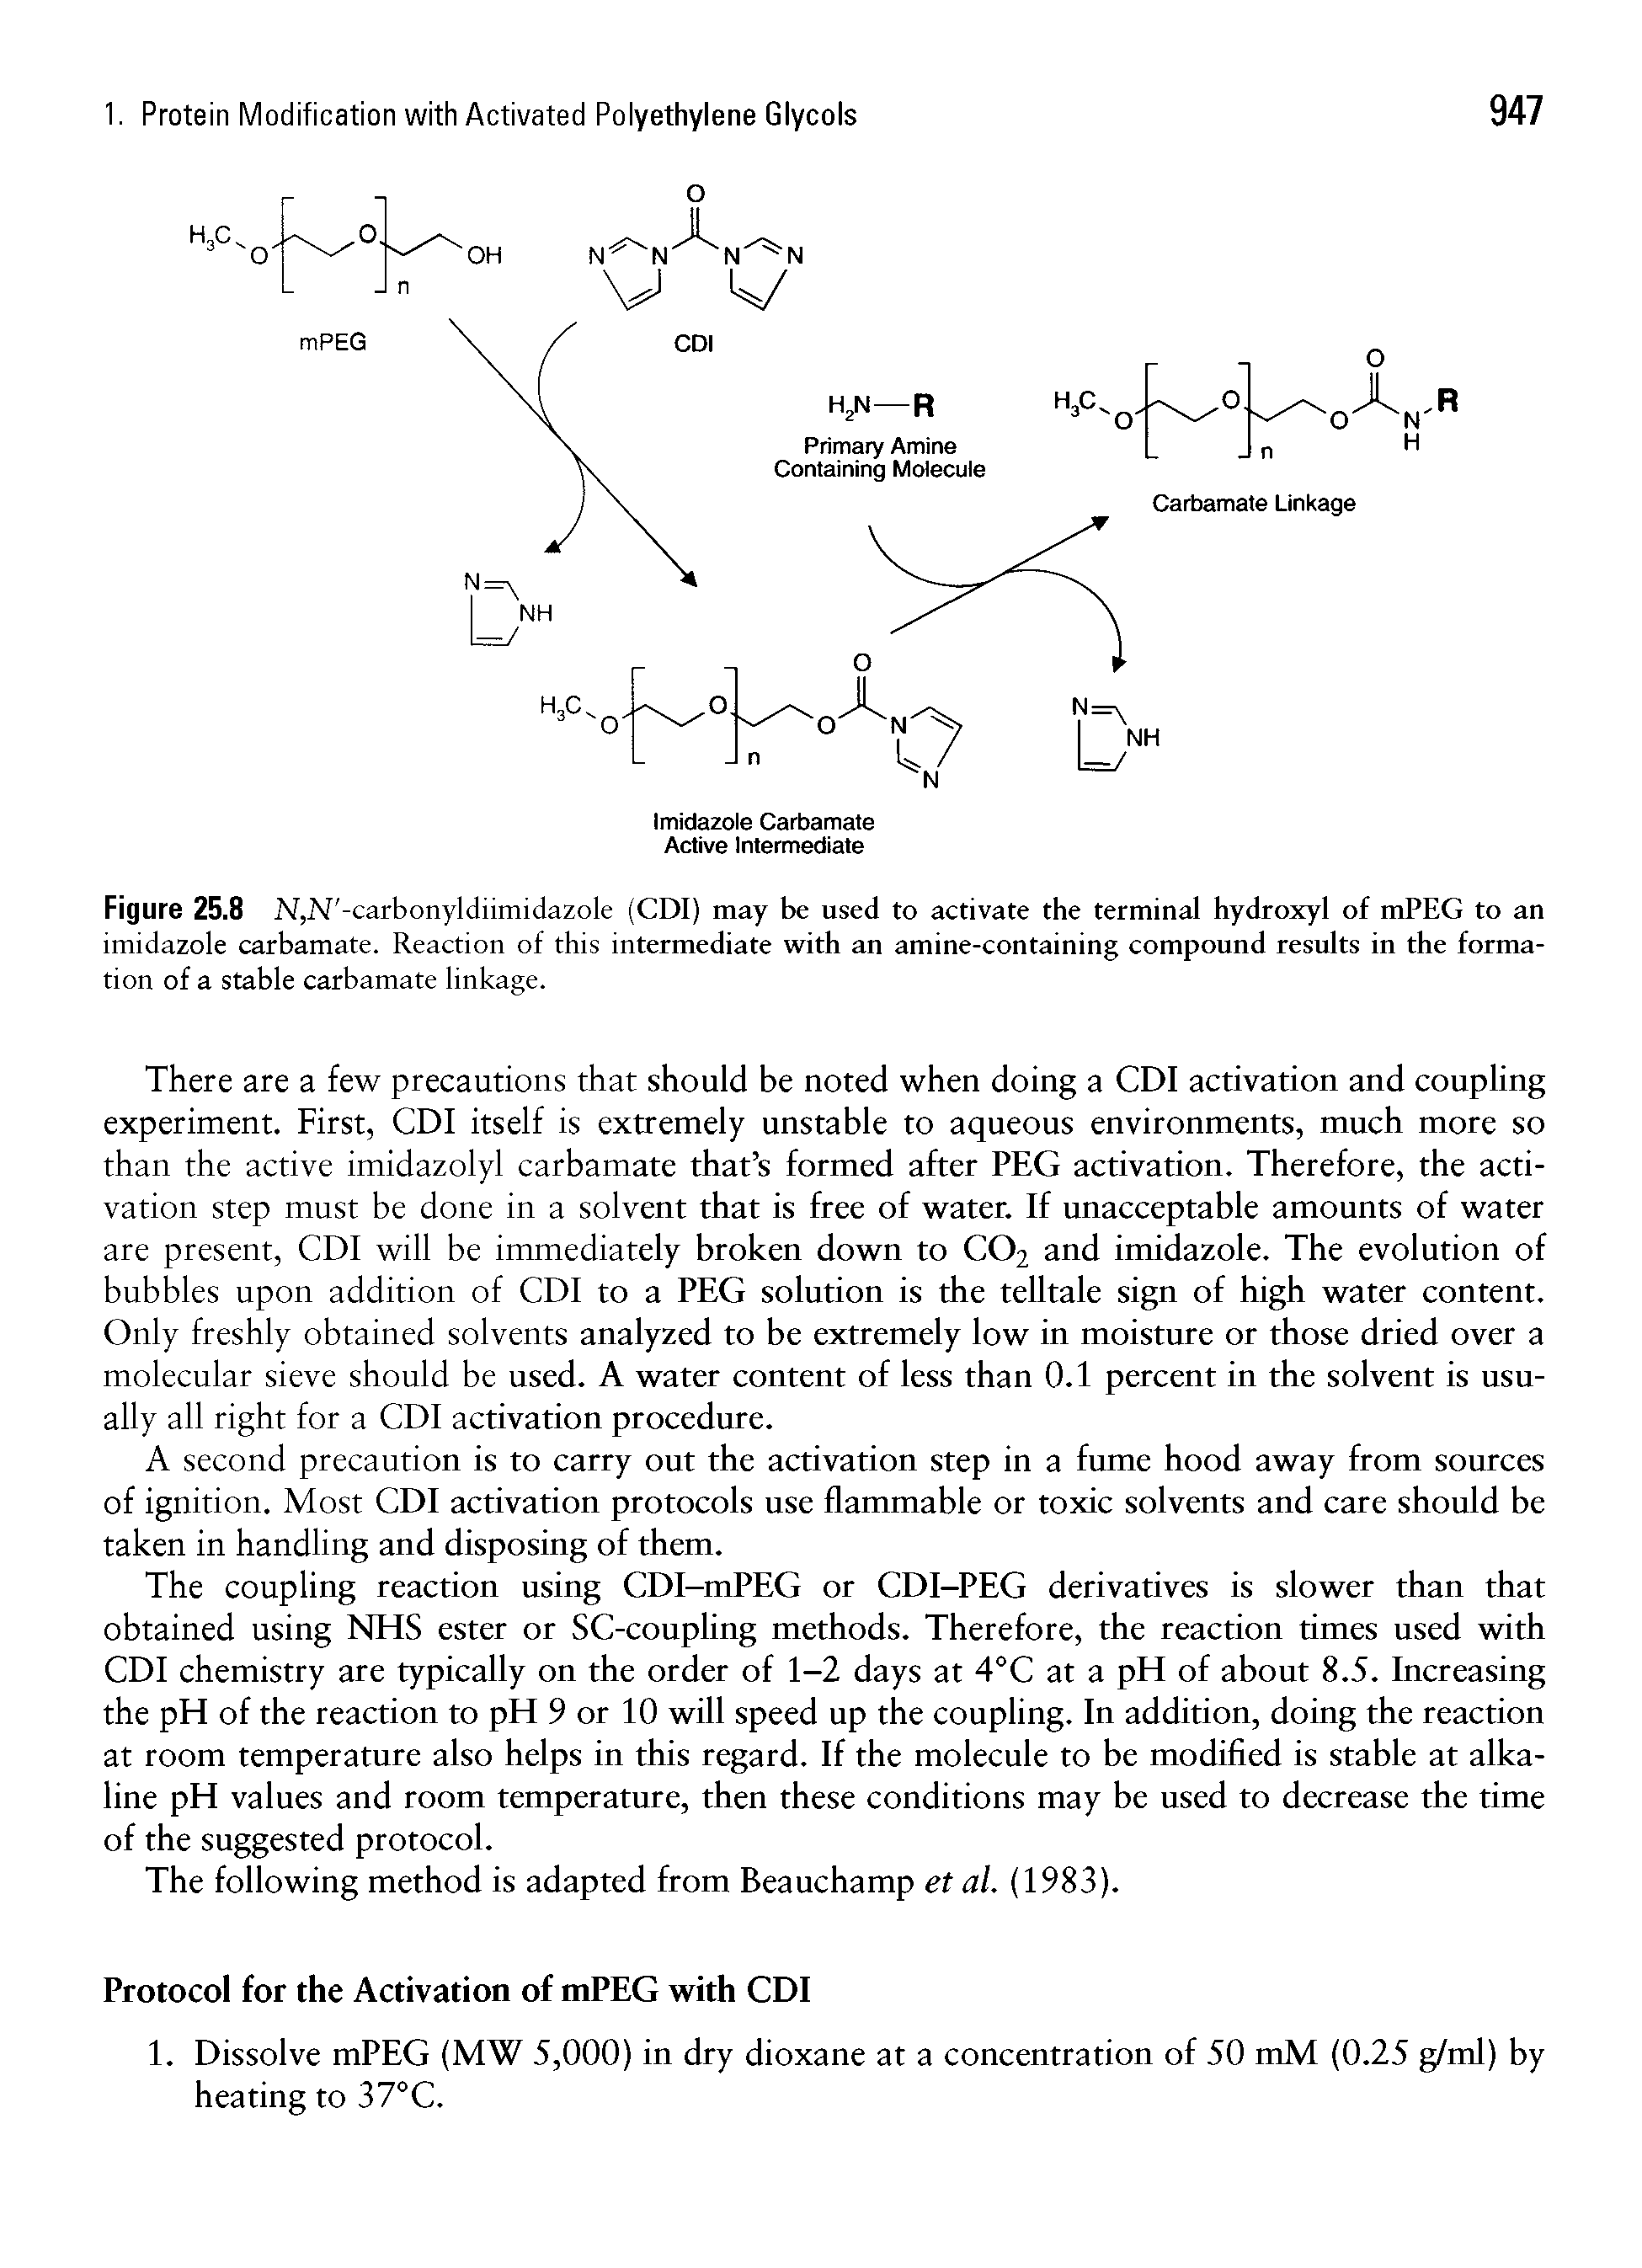 Figure 25.8 N,N -carbonyldiimidazole (CDI) may be used to activate the terminal hydroxyl of mPEG to an imidazole carbamate. Reaction of this intermediate with an amine-containing compound results in the formation of a stable carbamate linkage.